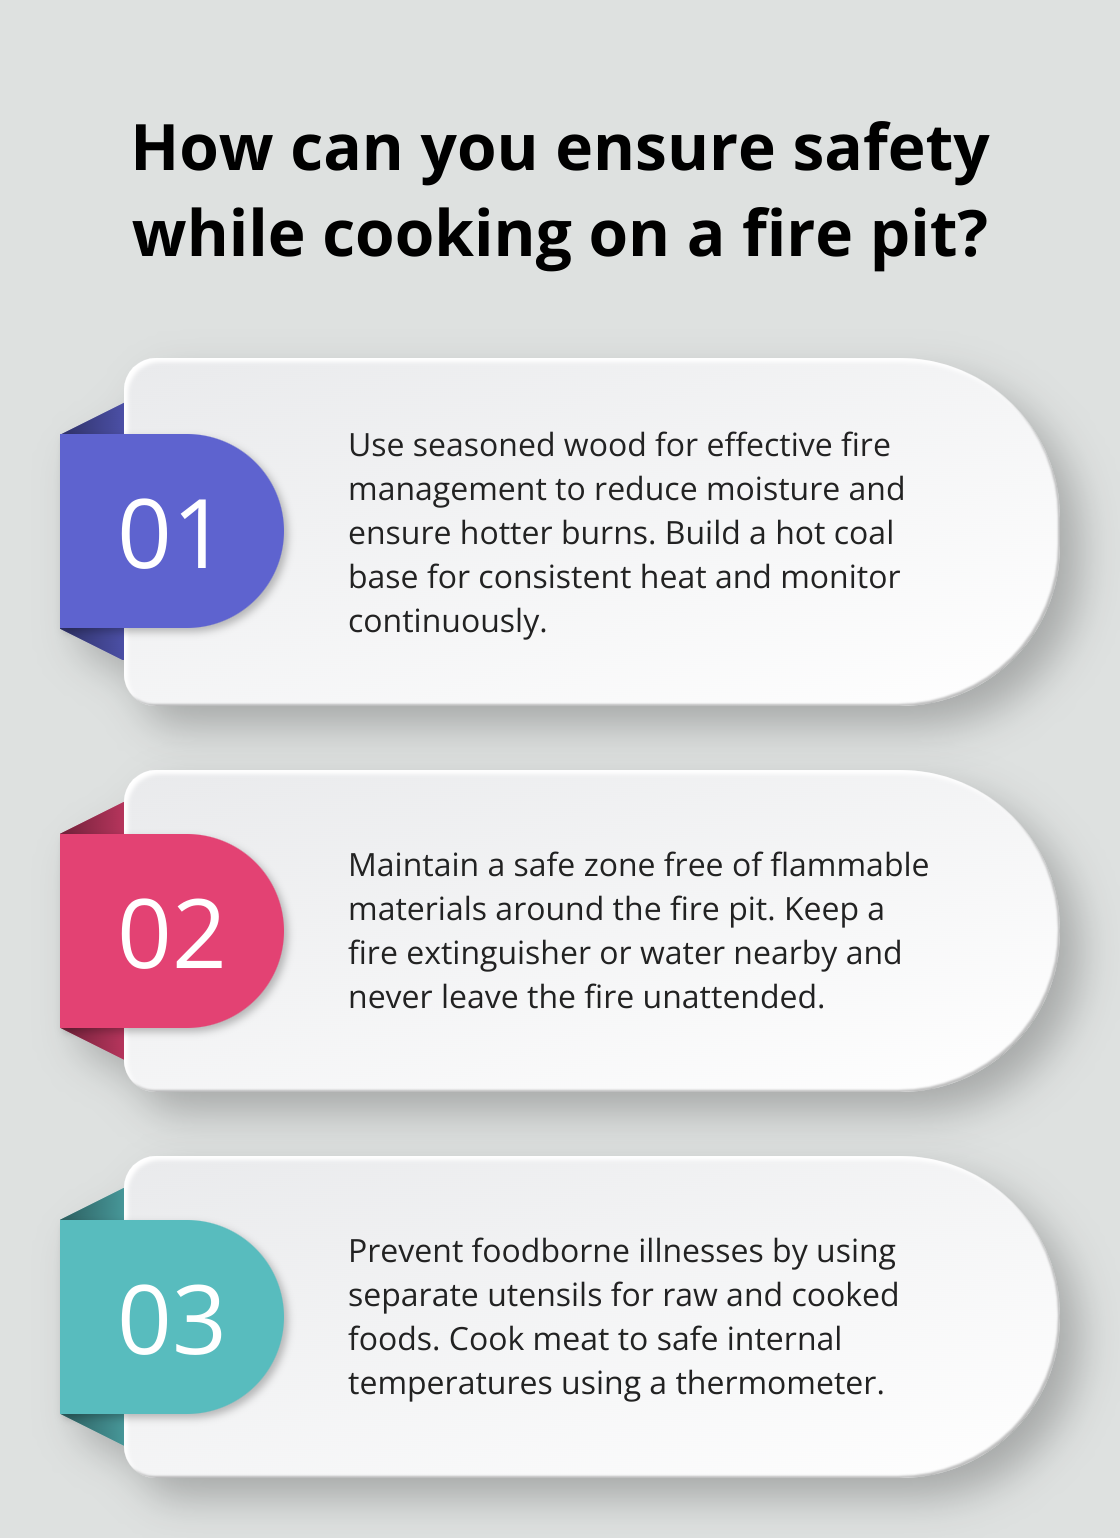 Fact - How can you ensure safety while cooking on a fire pit?